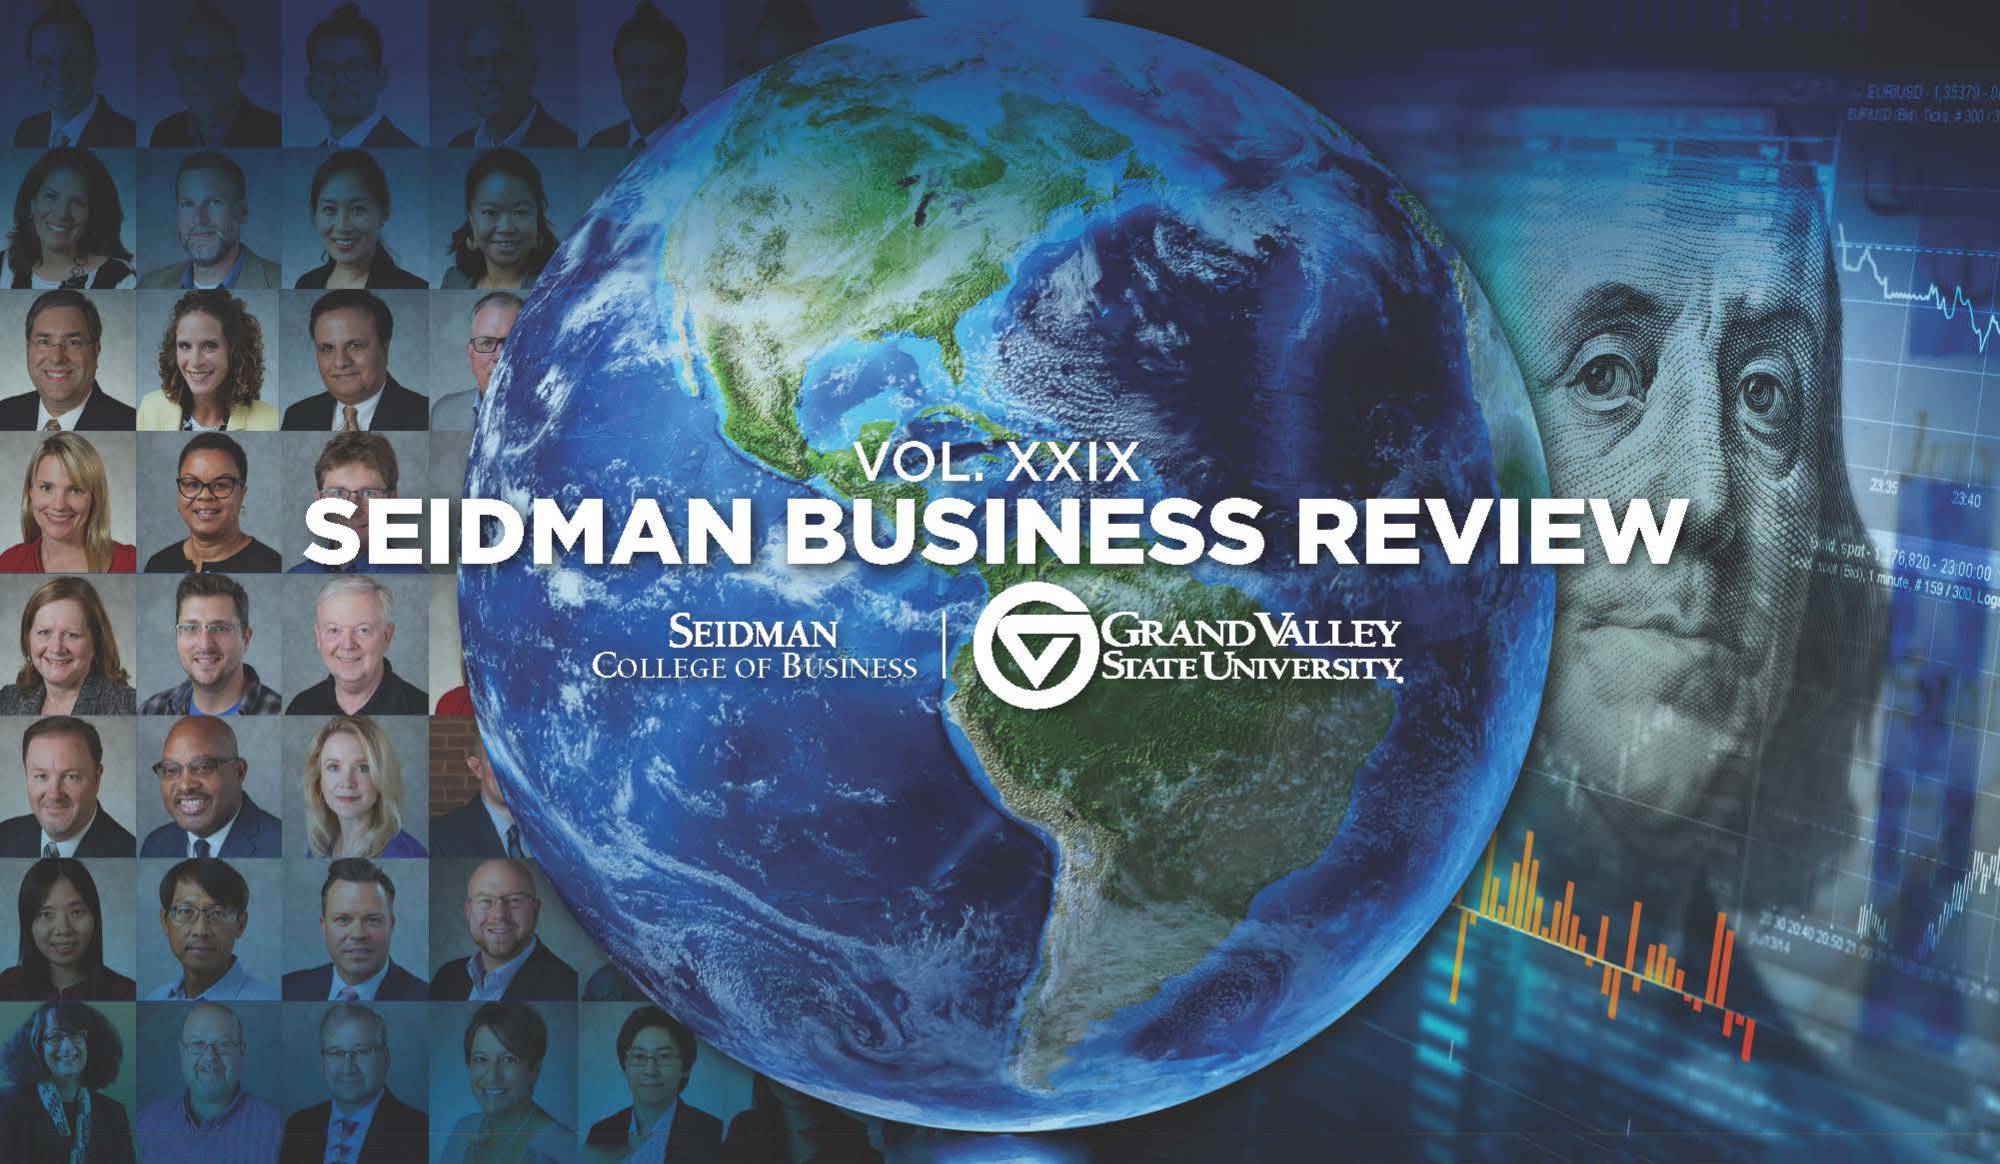 volume xxix Seidman business review magazine title with pictures of planet earth, faculty, and money